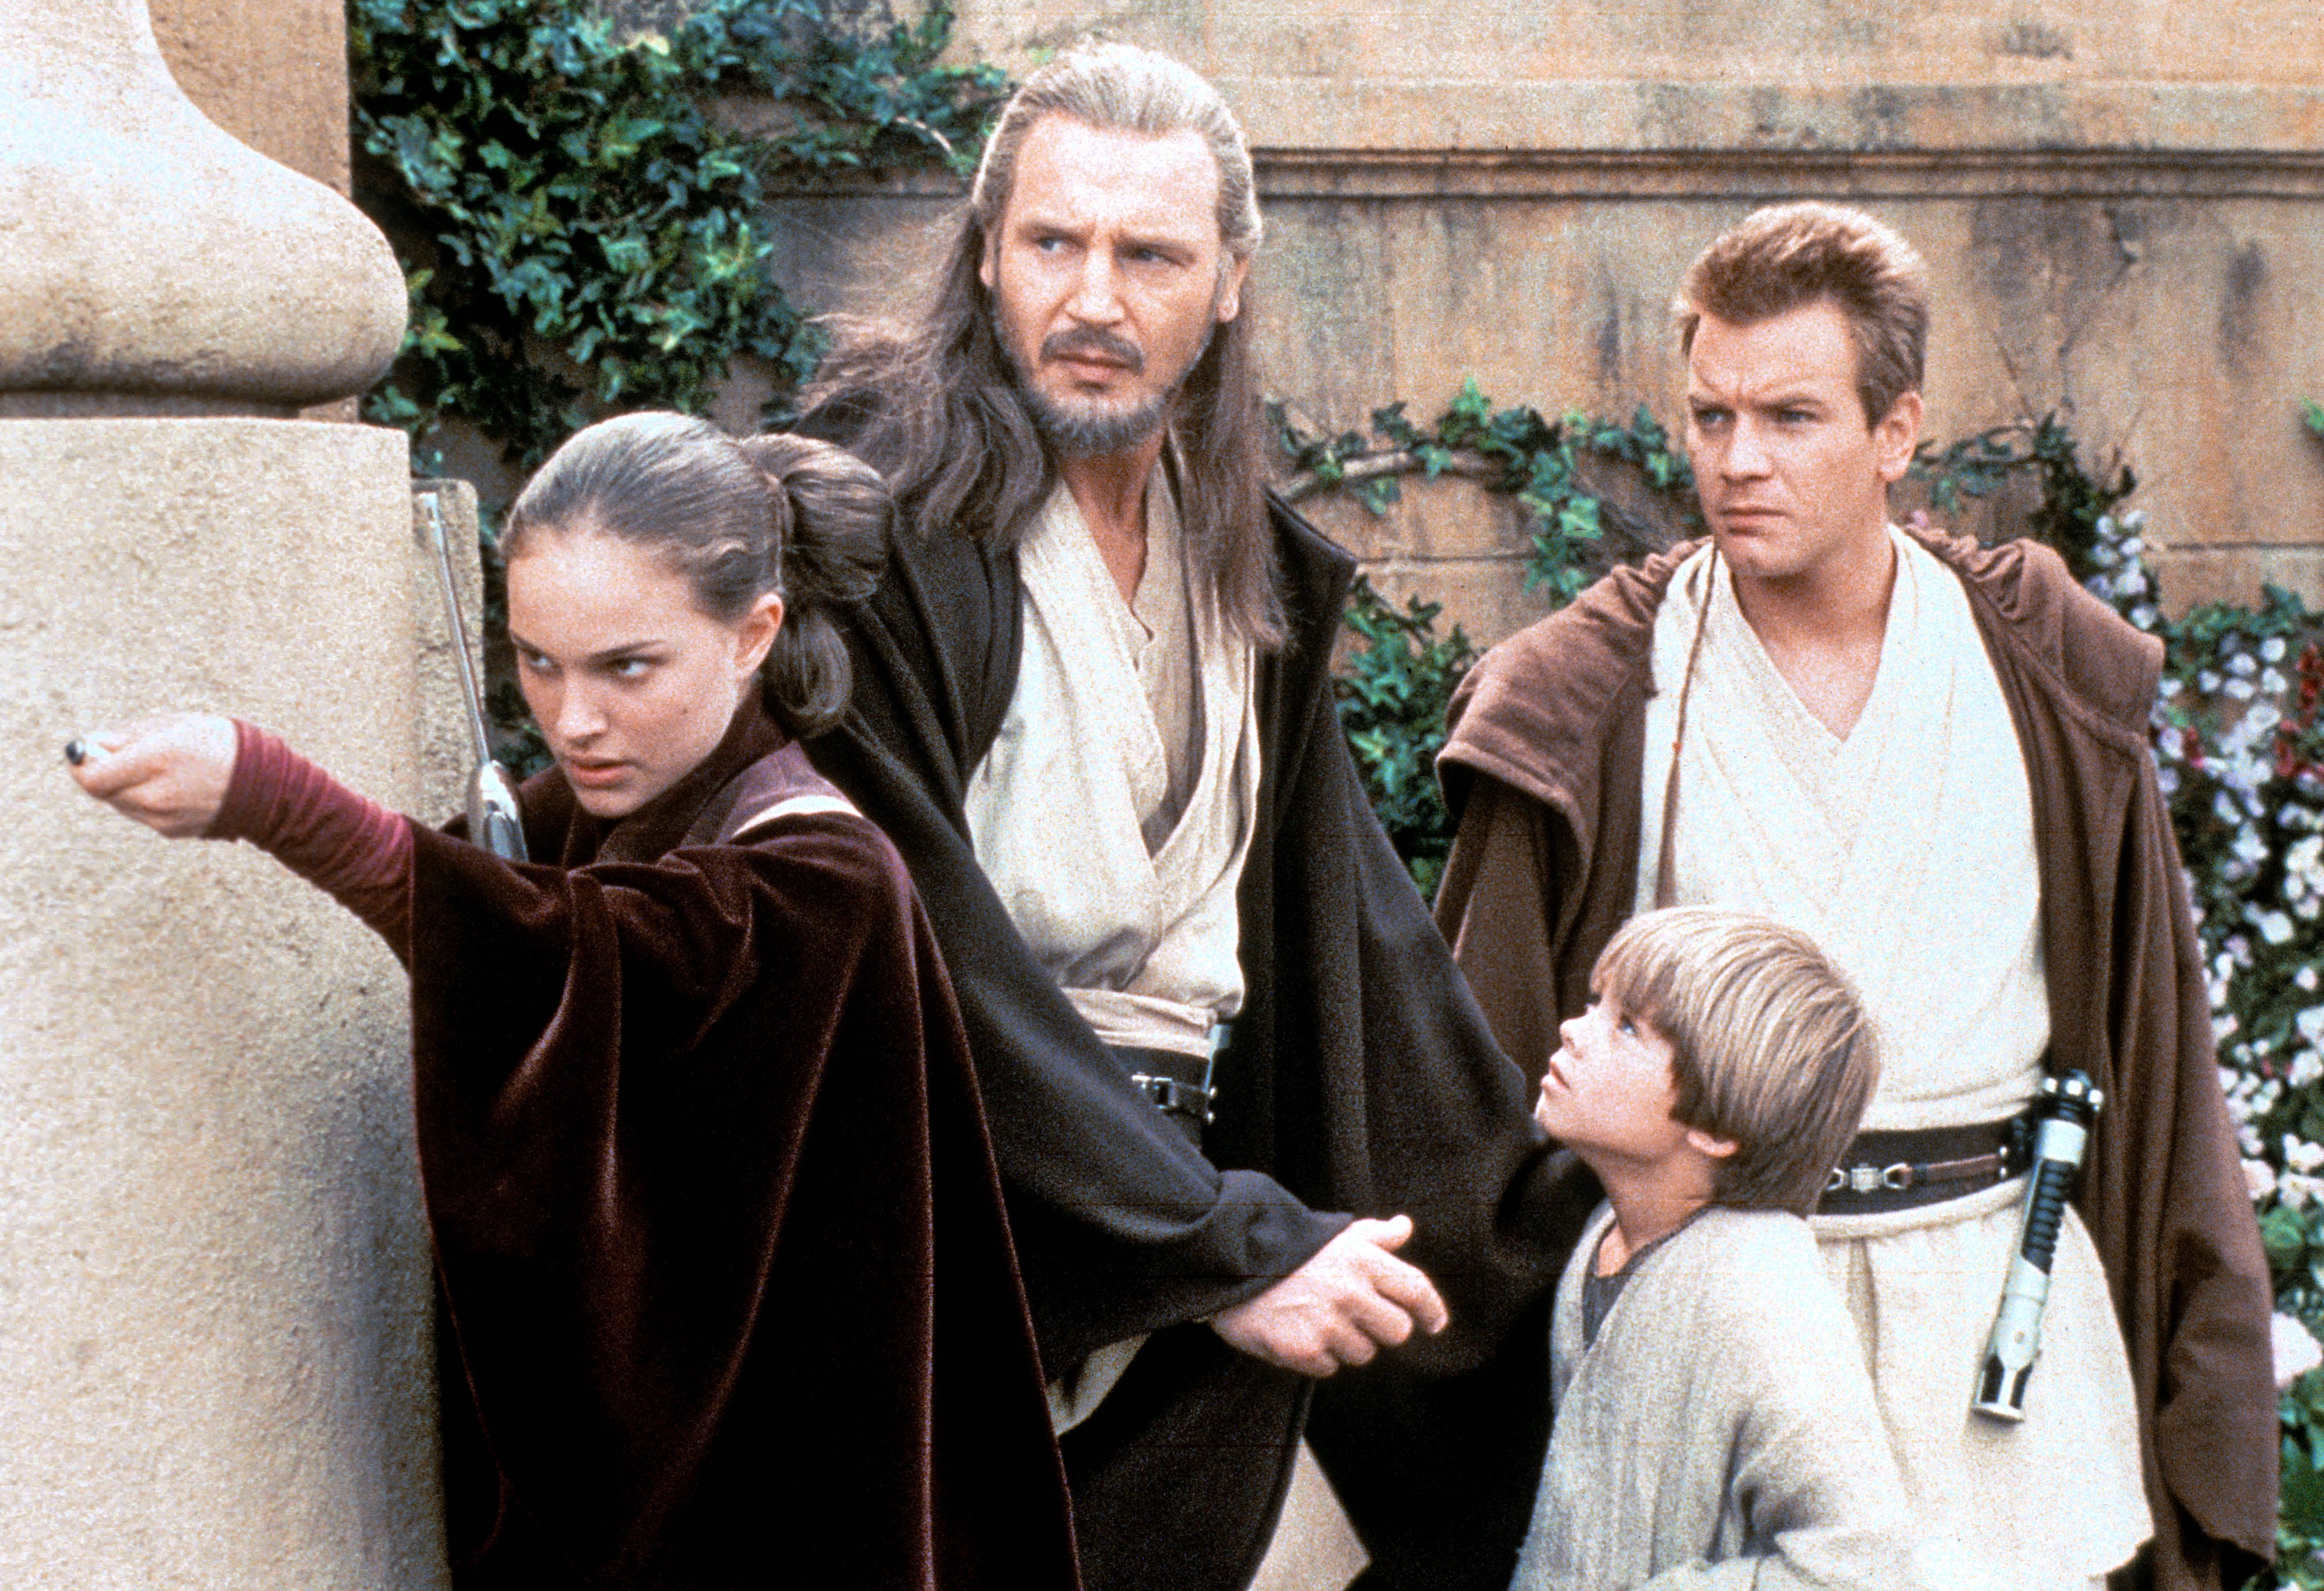 Learn the ways of the Living Force with this definitive guide to Master Qui-Gon  Jinn